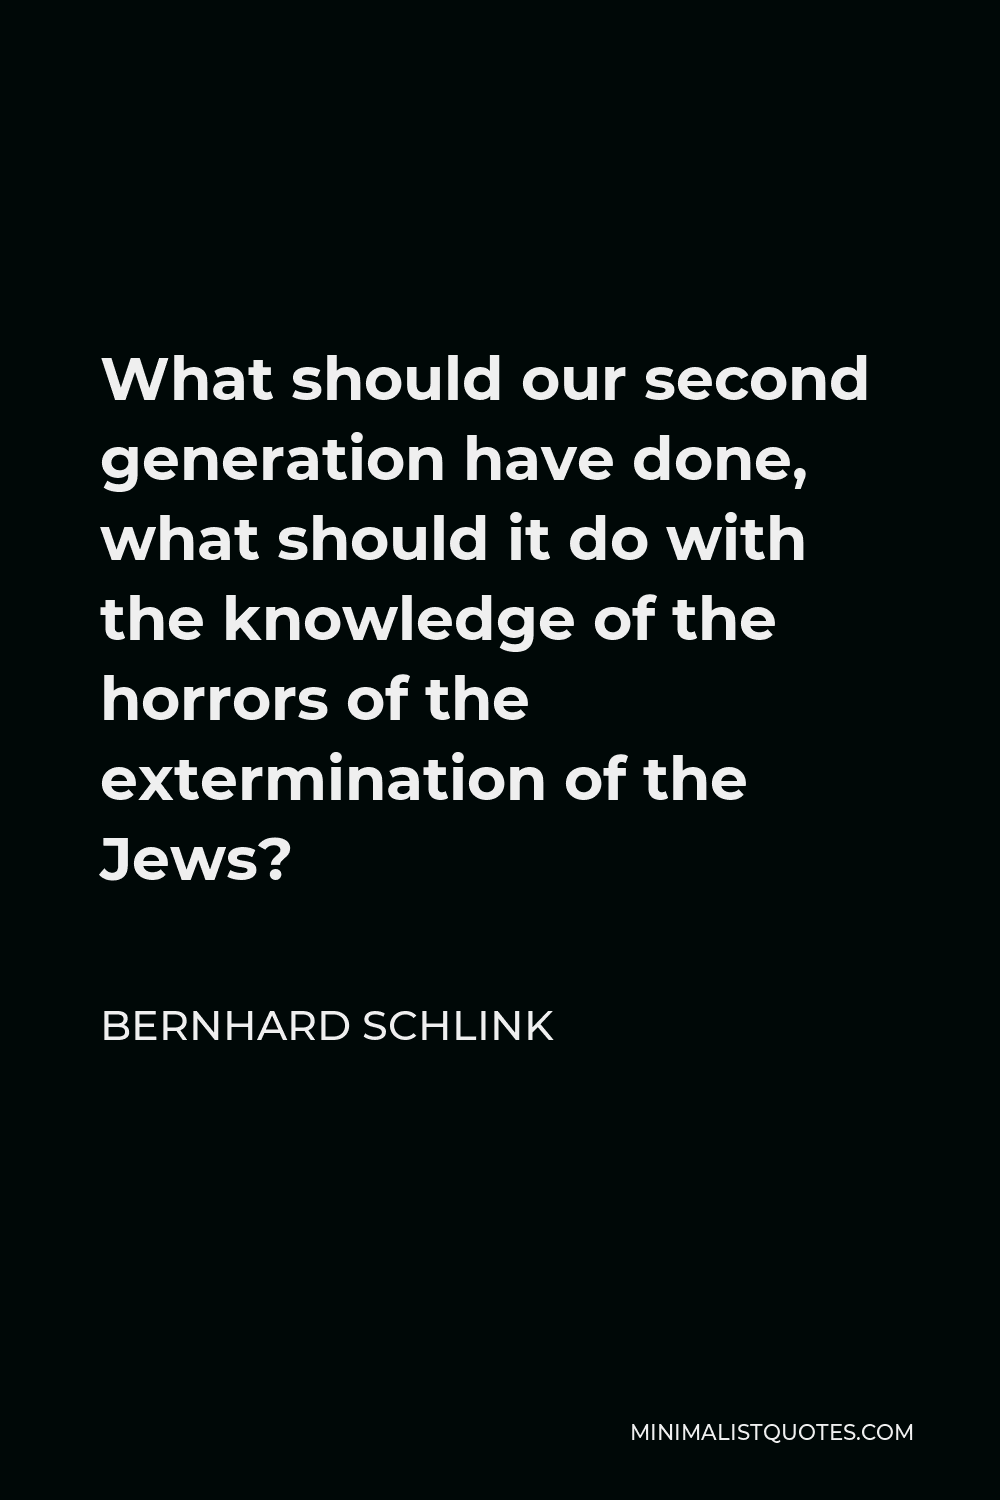 Bernhard Schlink Quote - What should our second generation have done, what should it do with the knowledge of the horrors of the extermination of the Jews?